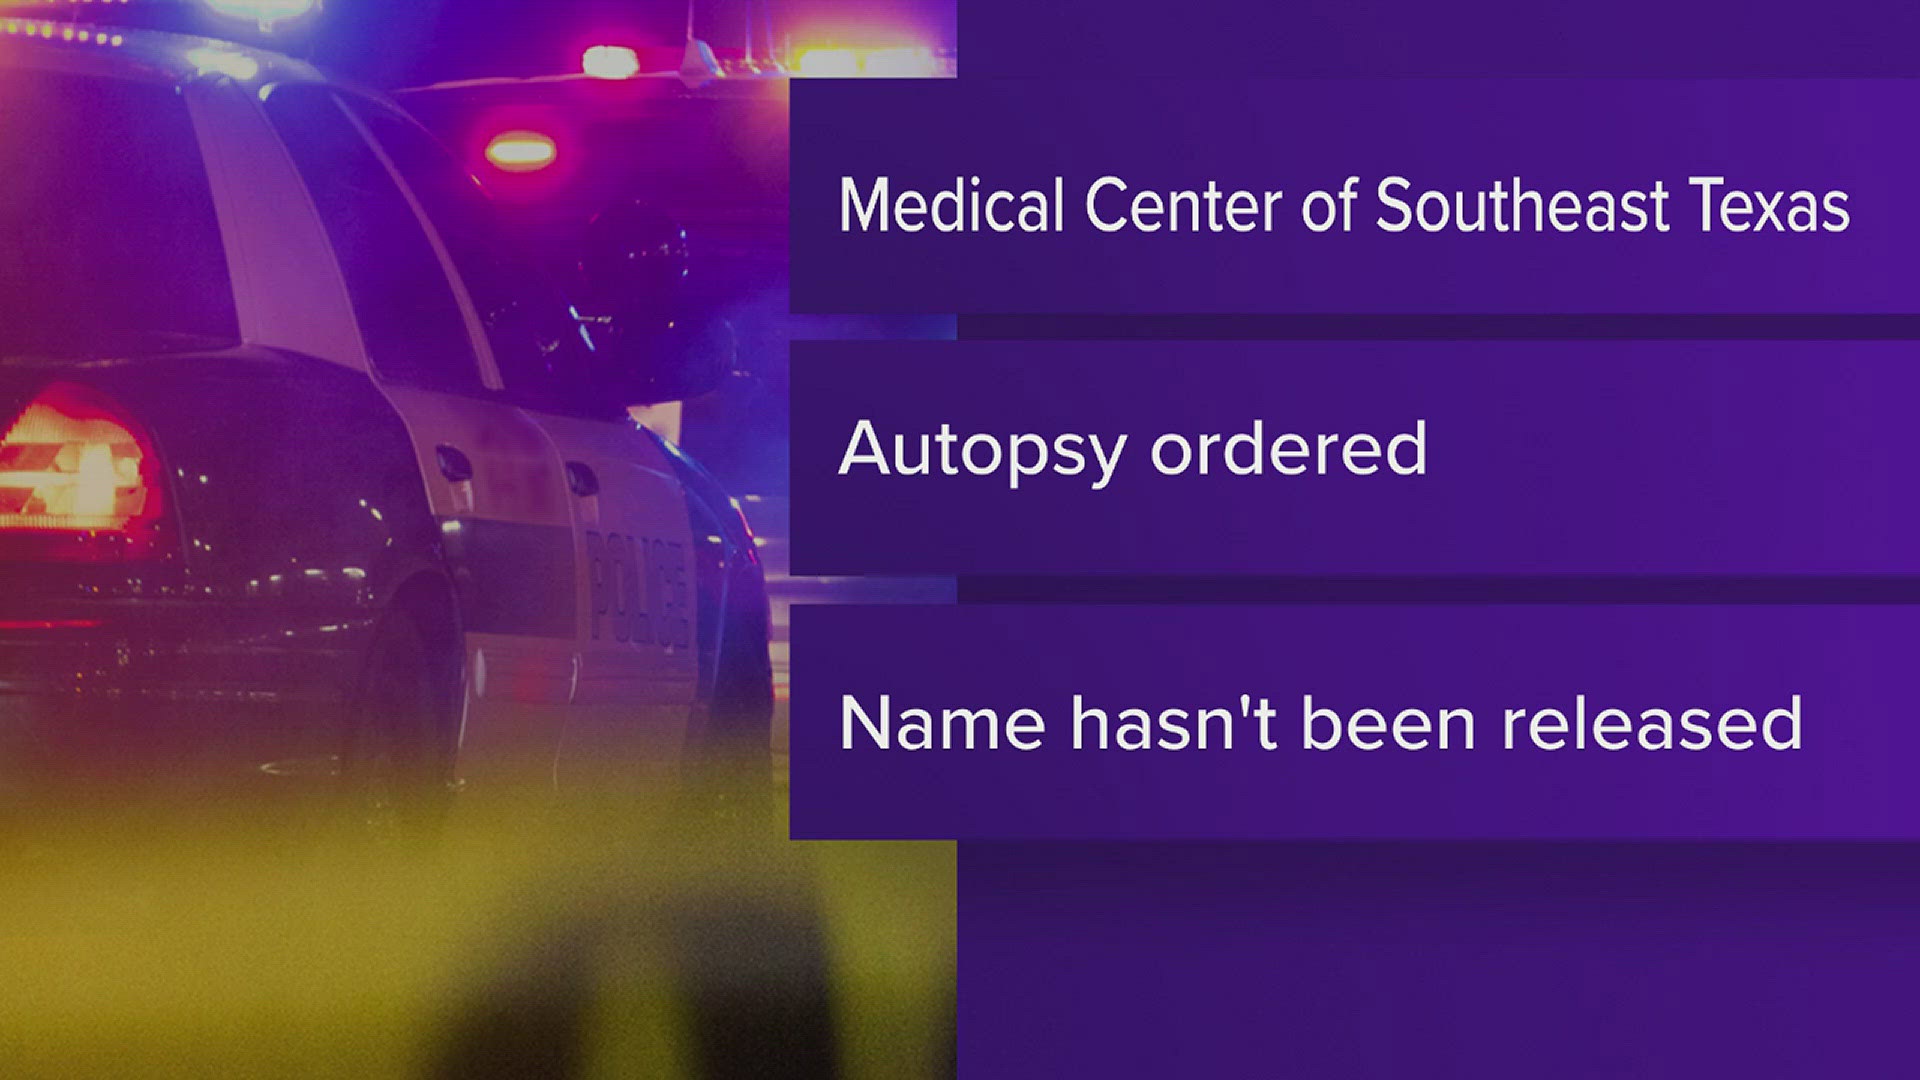 A person was brought to the Medical Center of Southeast Texas Emergency Room suffering from a gunshot wound.